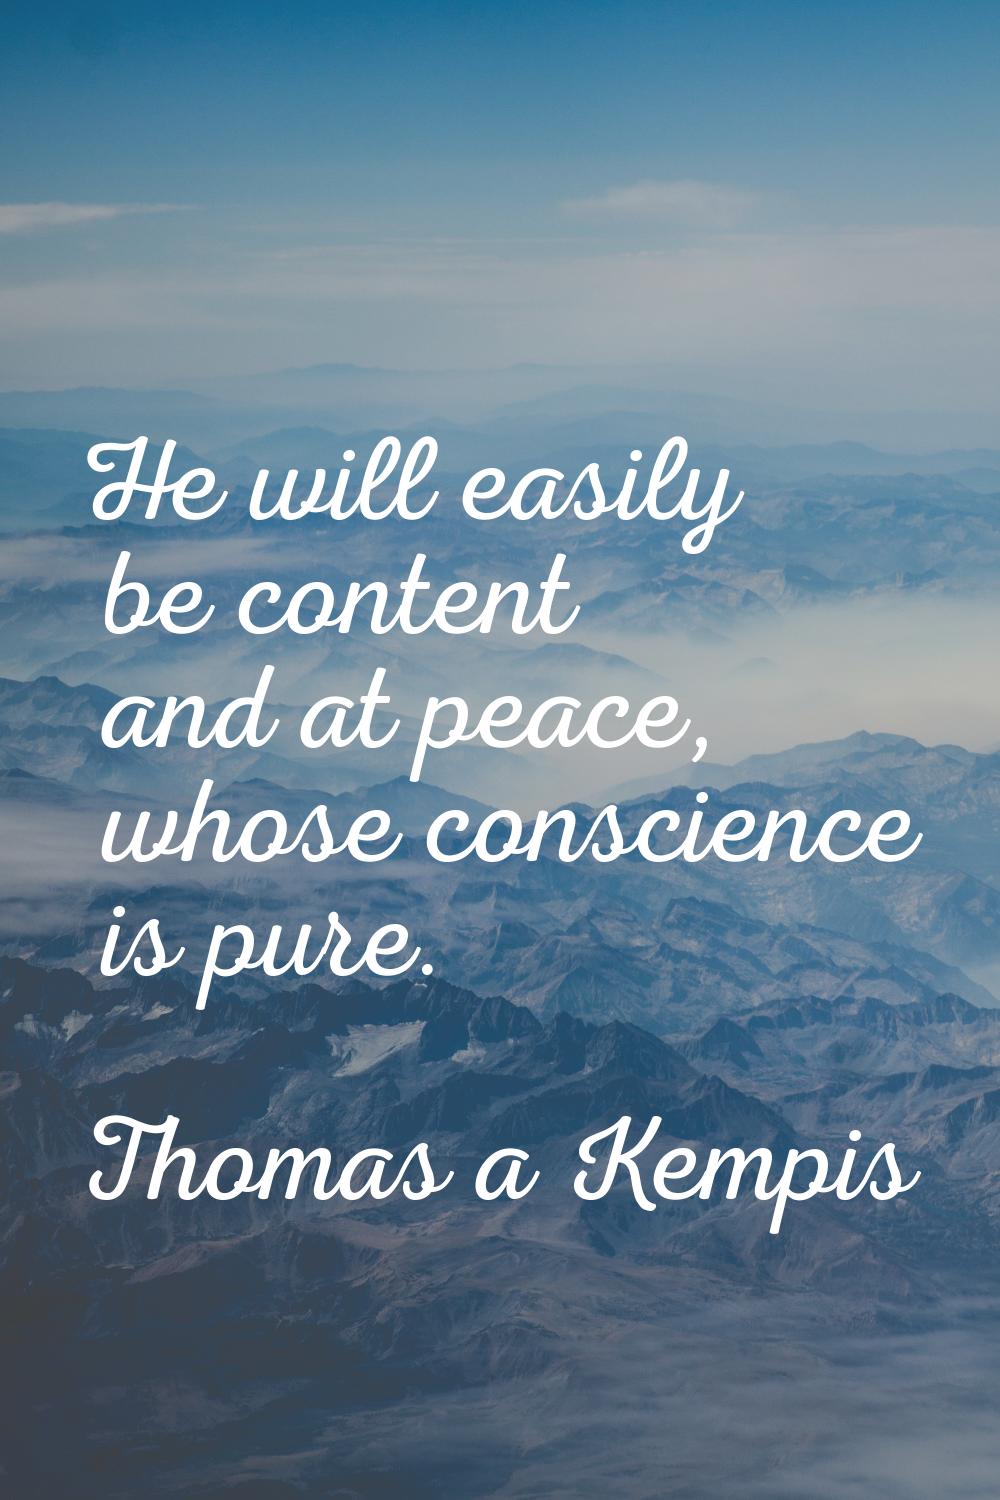 He will easily be content and at peace, whose conscience is pure.